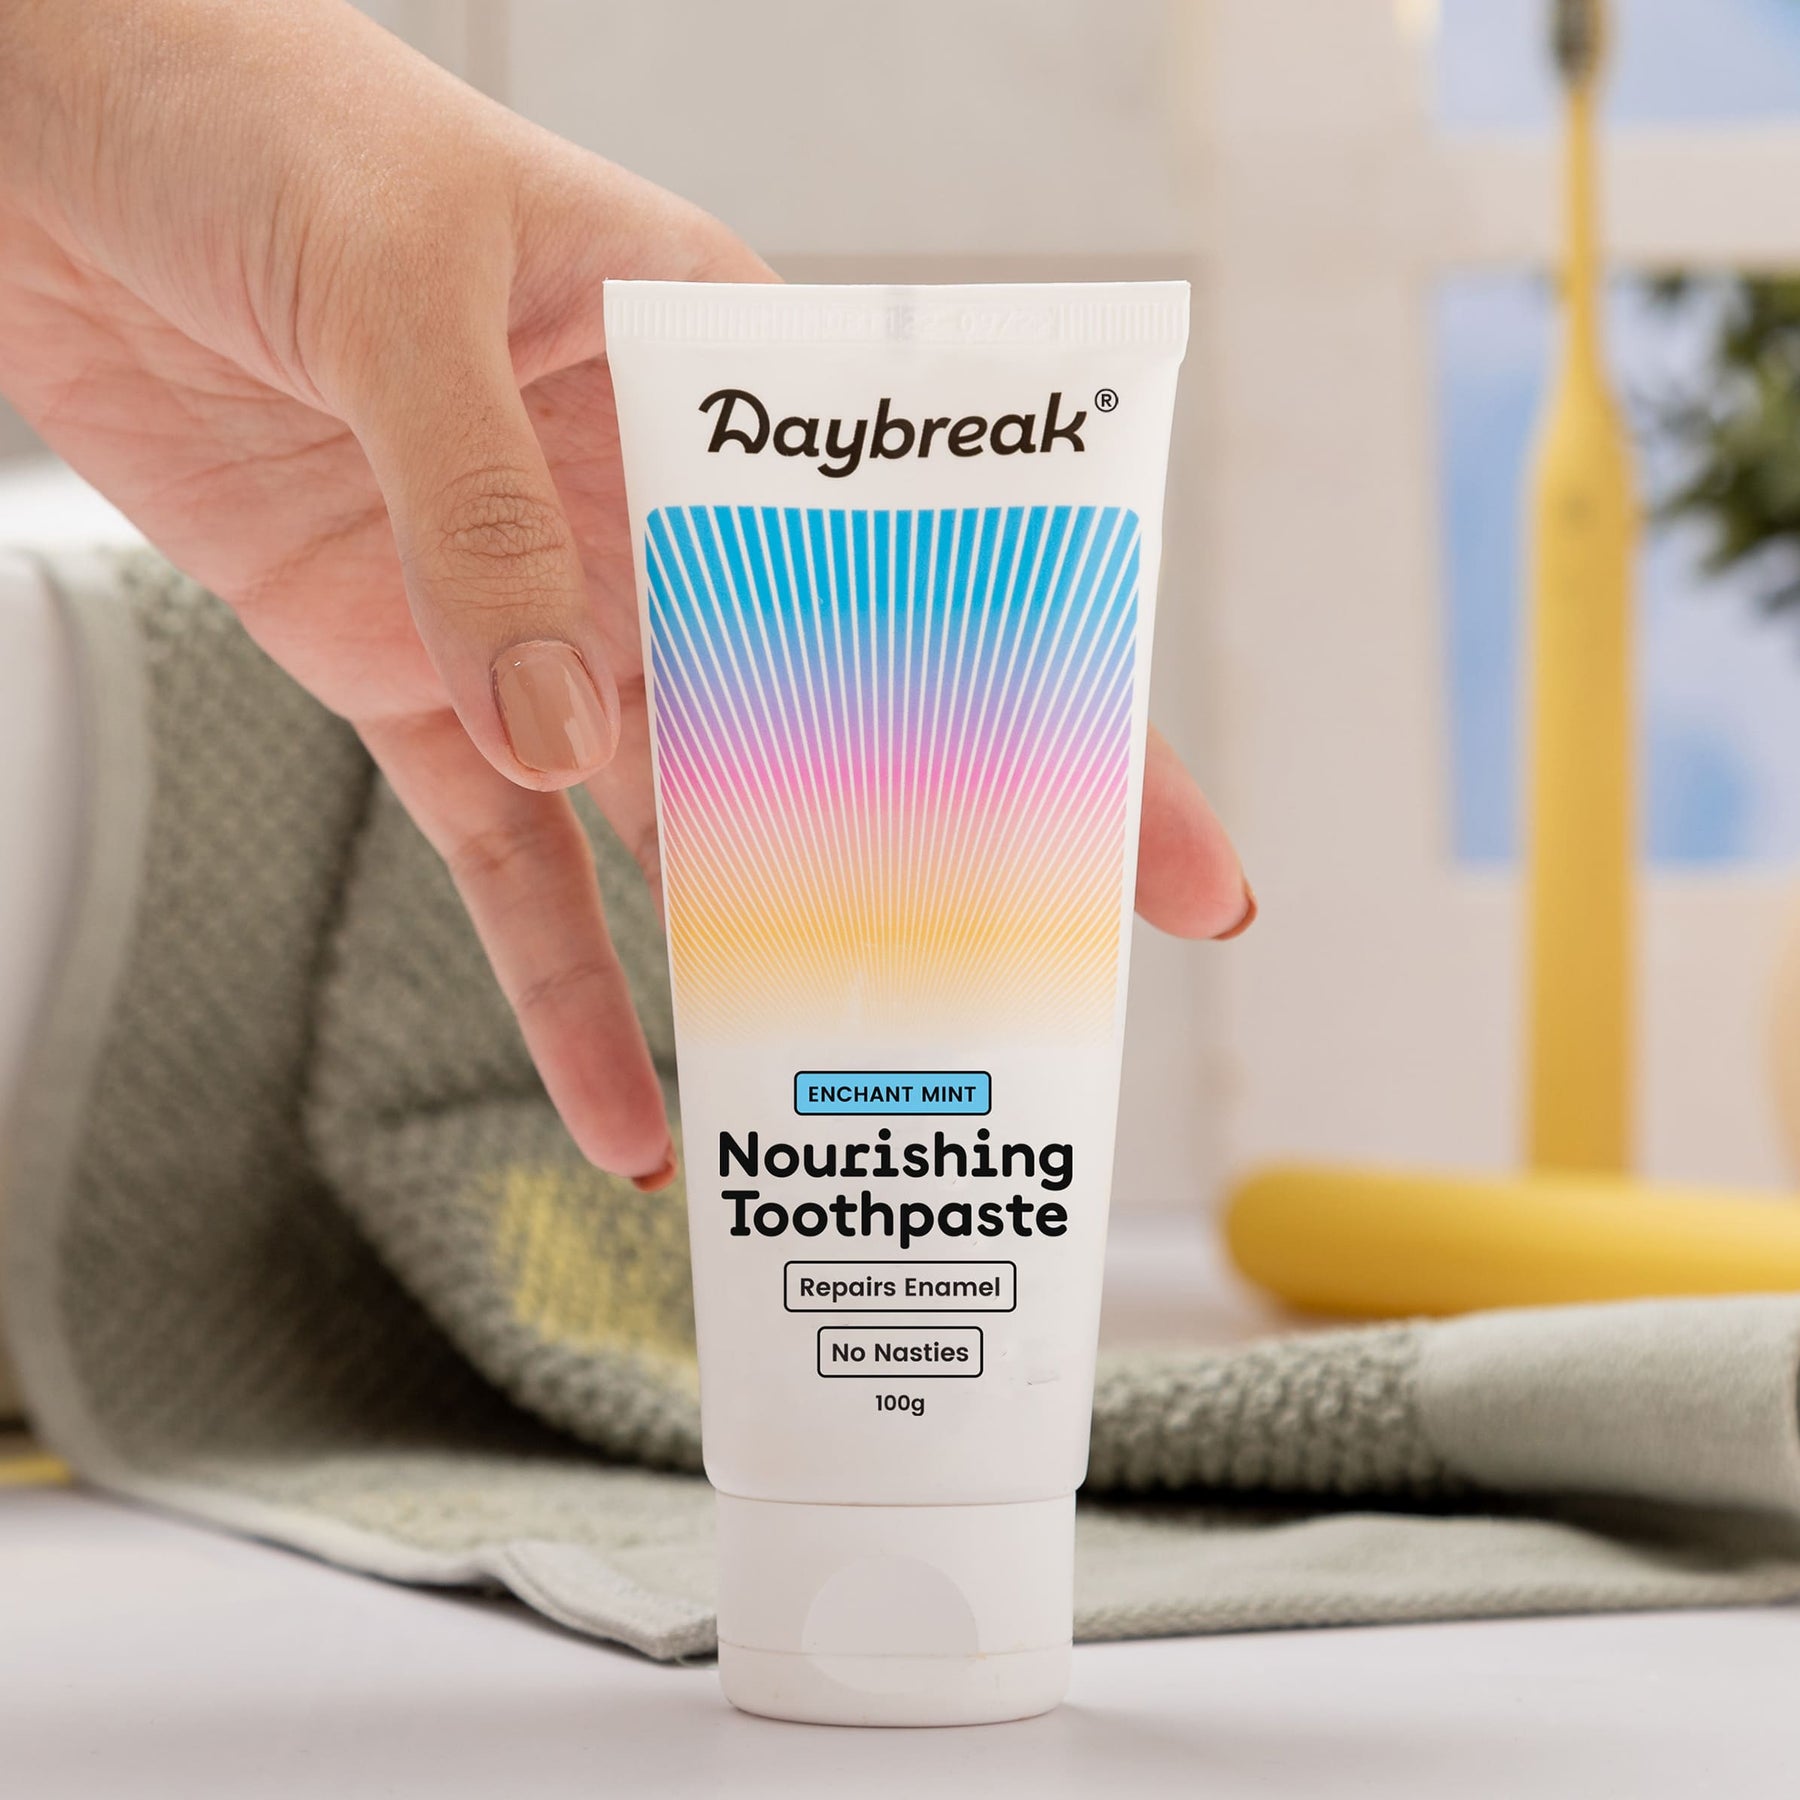 A hand reaching for the Daybreak Brighten Toothpaste sitting on a bathroom shelf